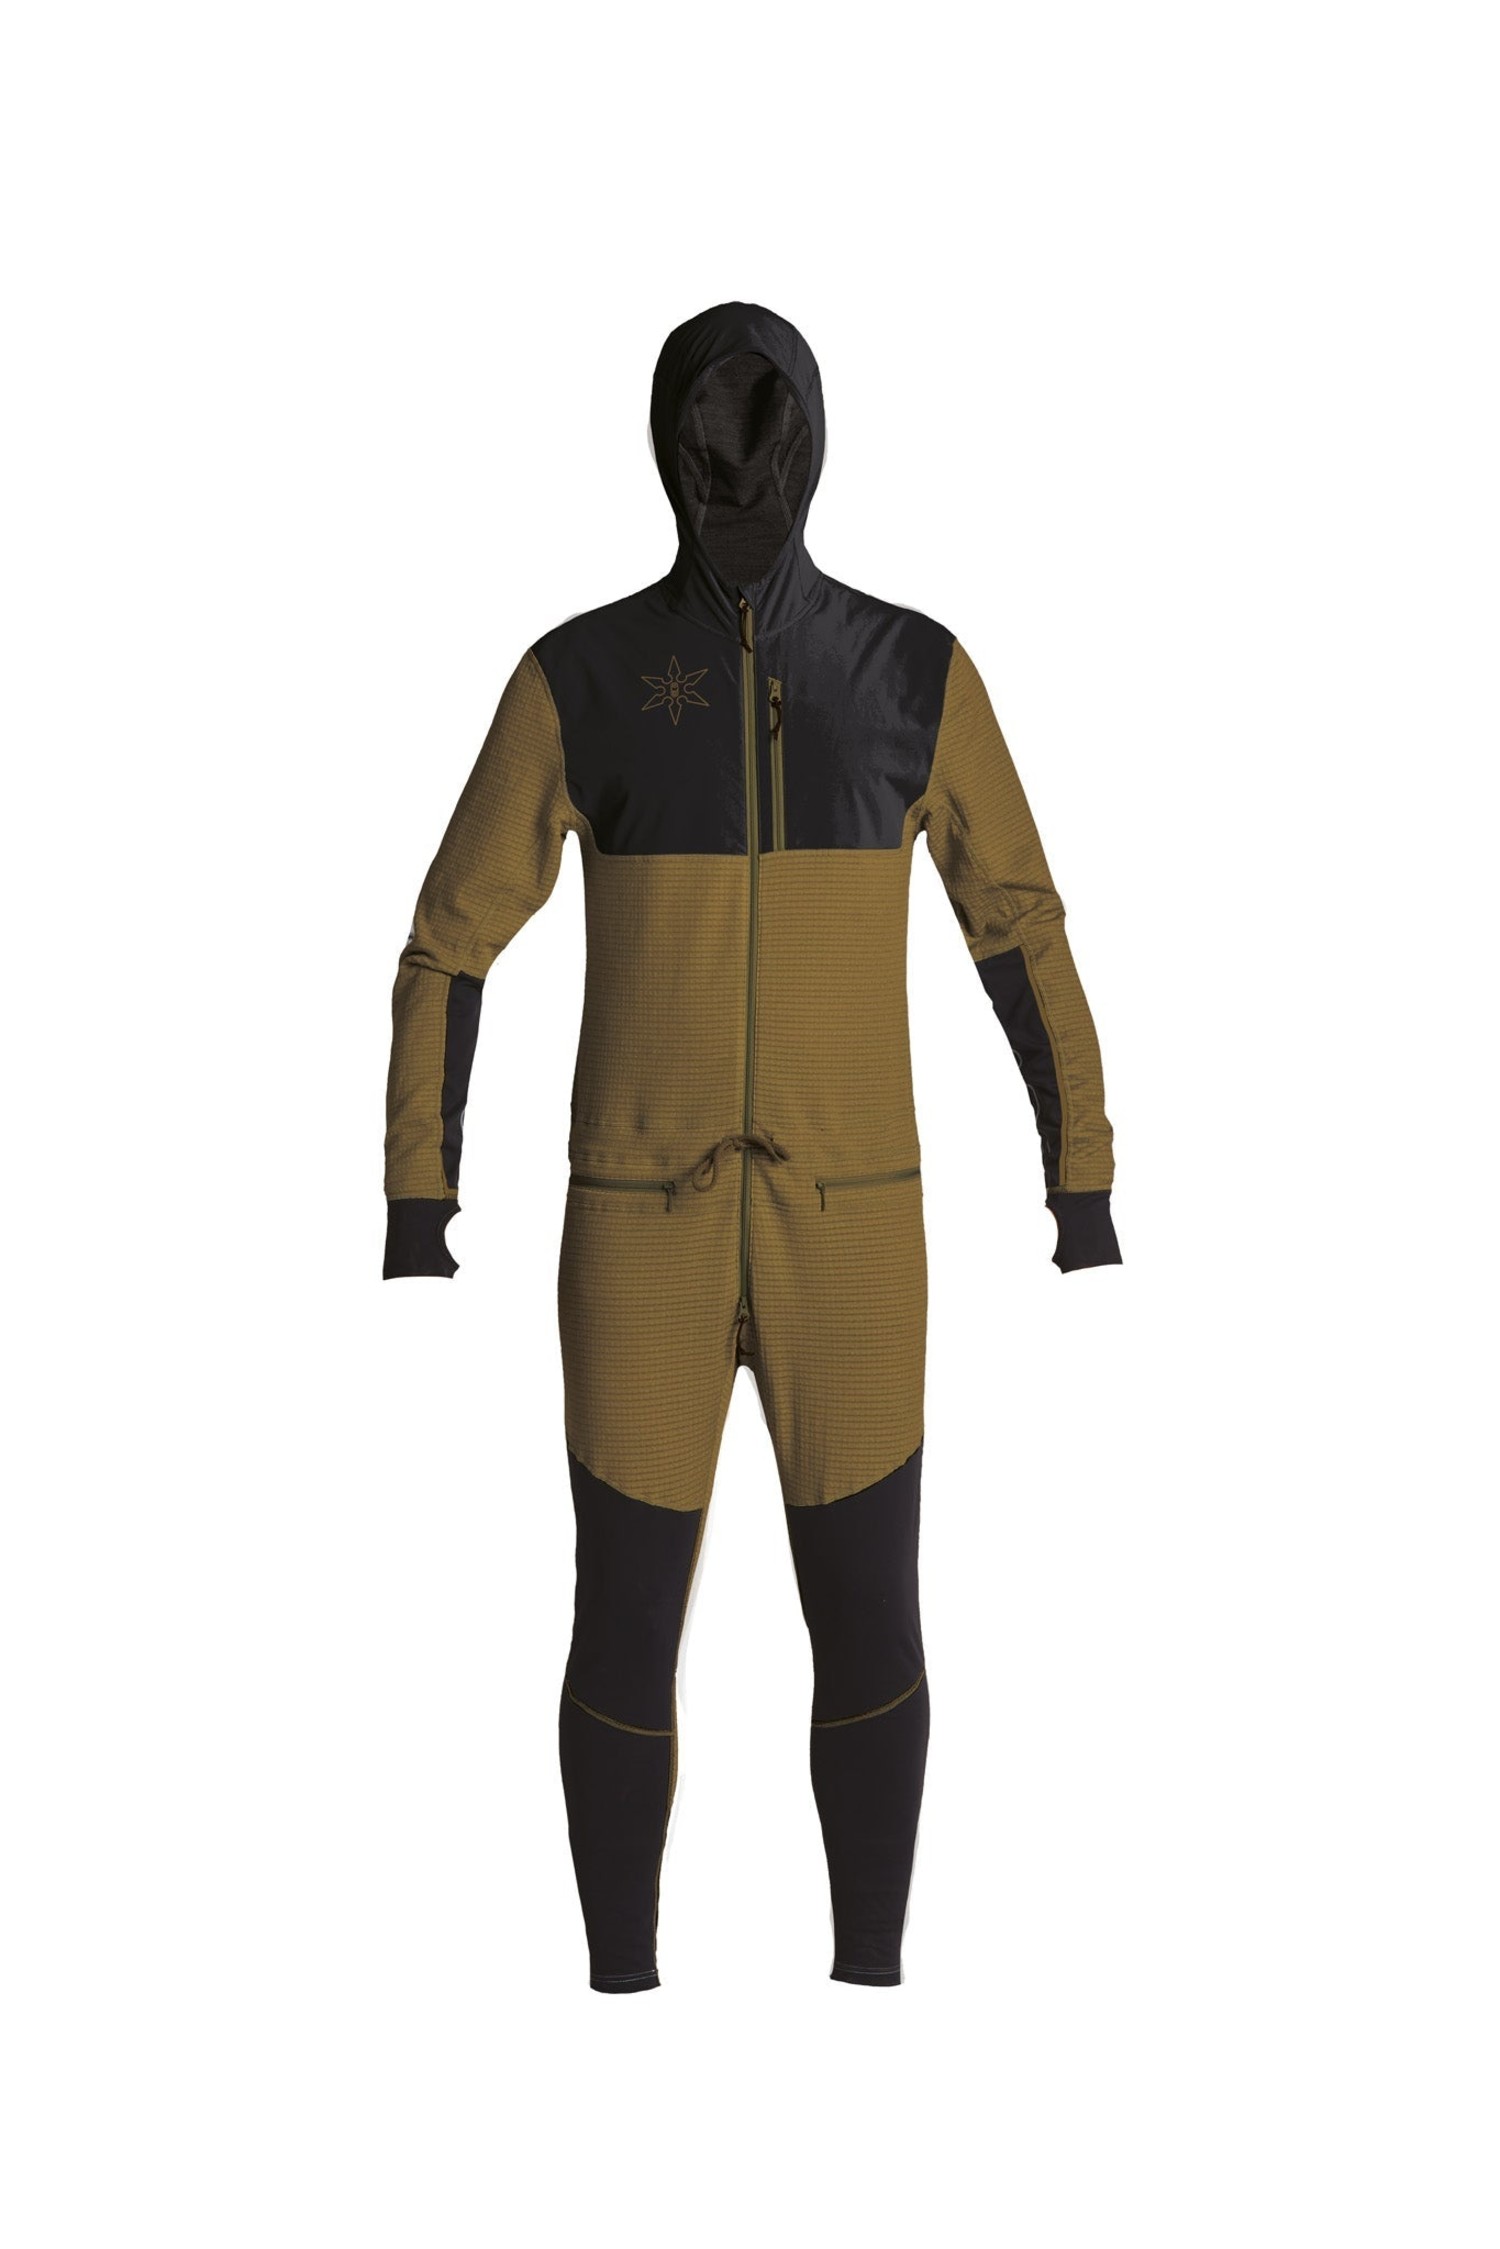 Ninja Suit Pro II  Grizzly - The Choice Shop